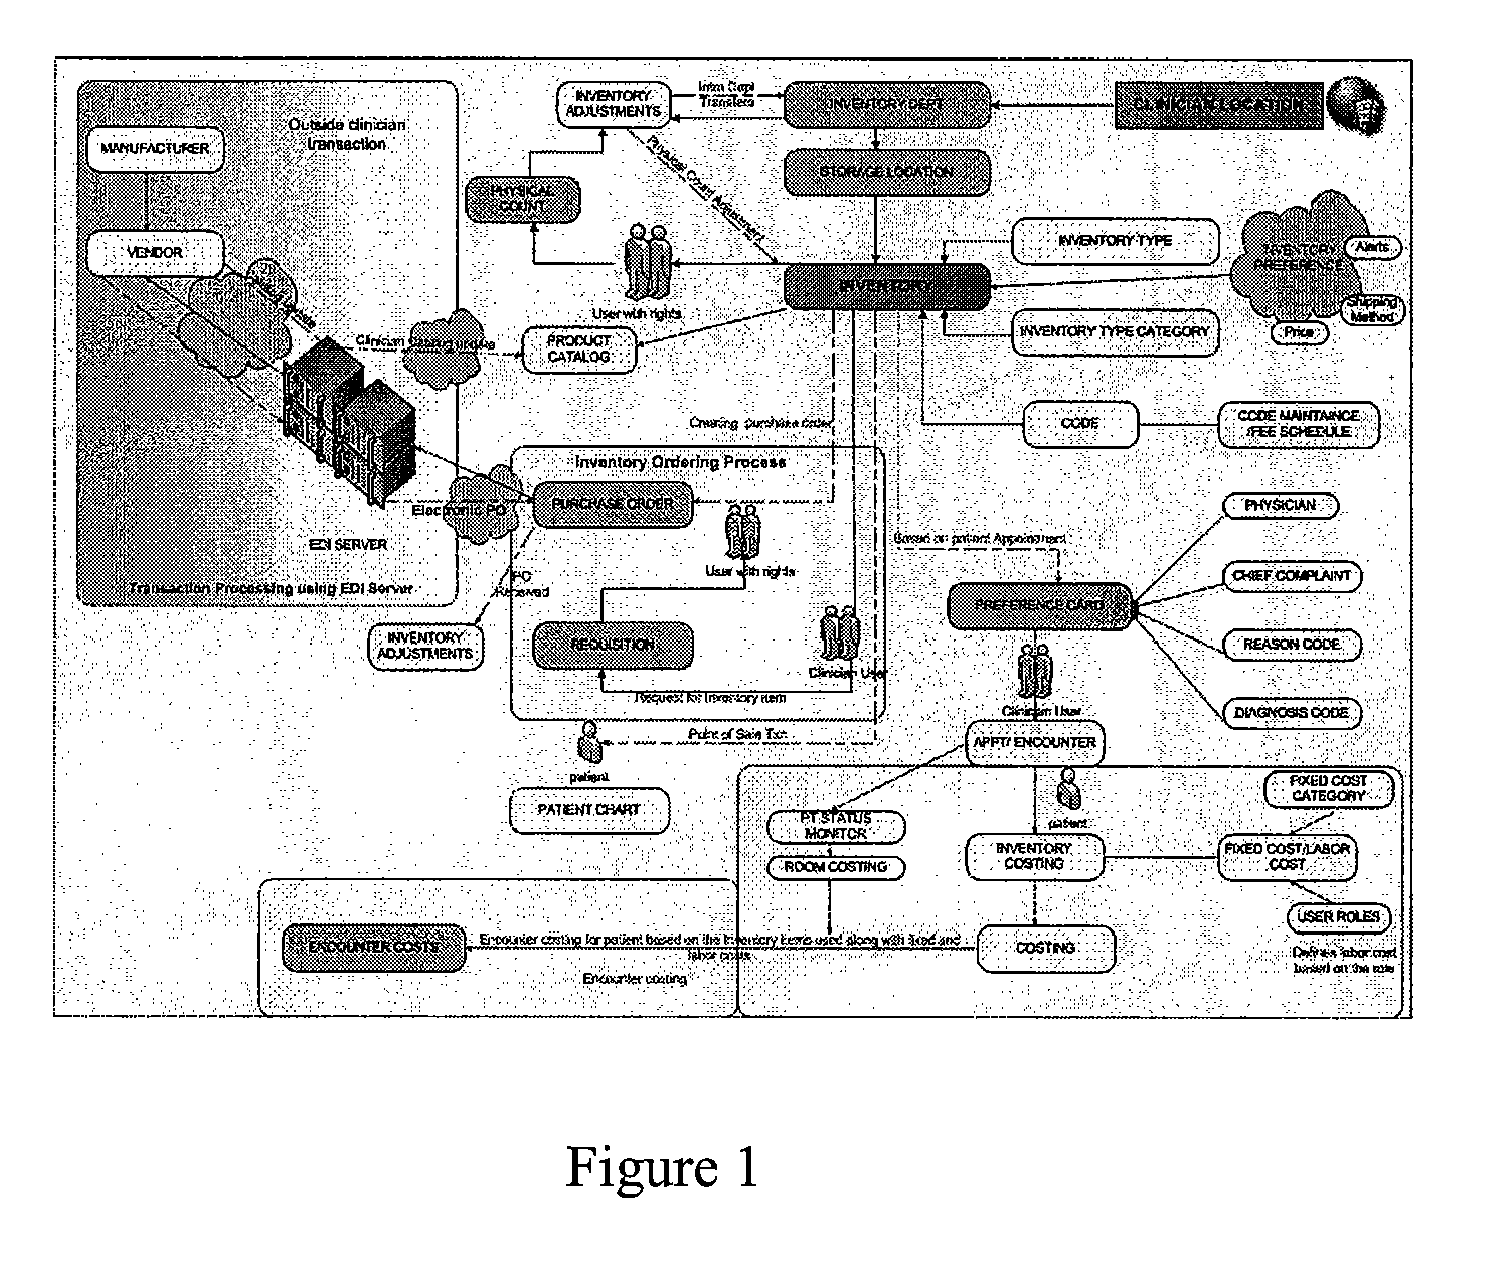 Method and apparatus for supply chain management